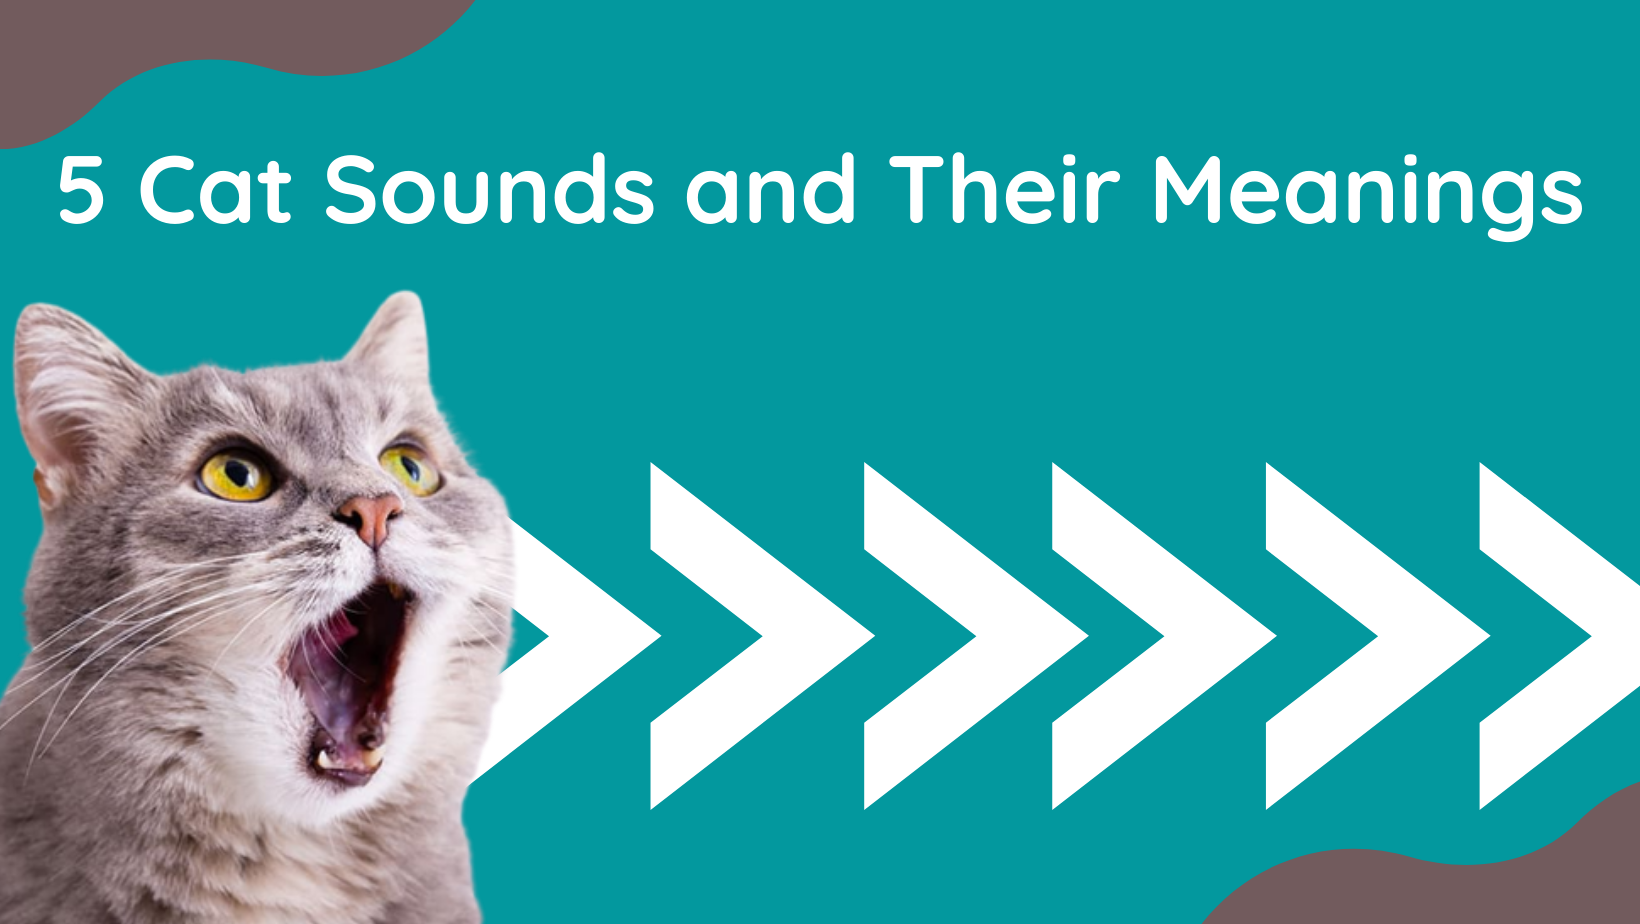 5 Cat Sounds and Their Meanings